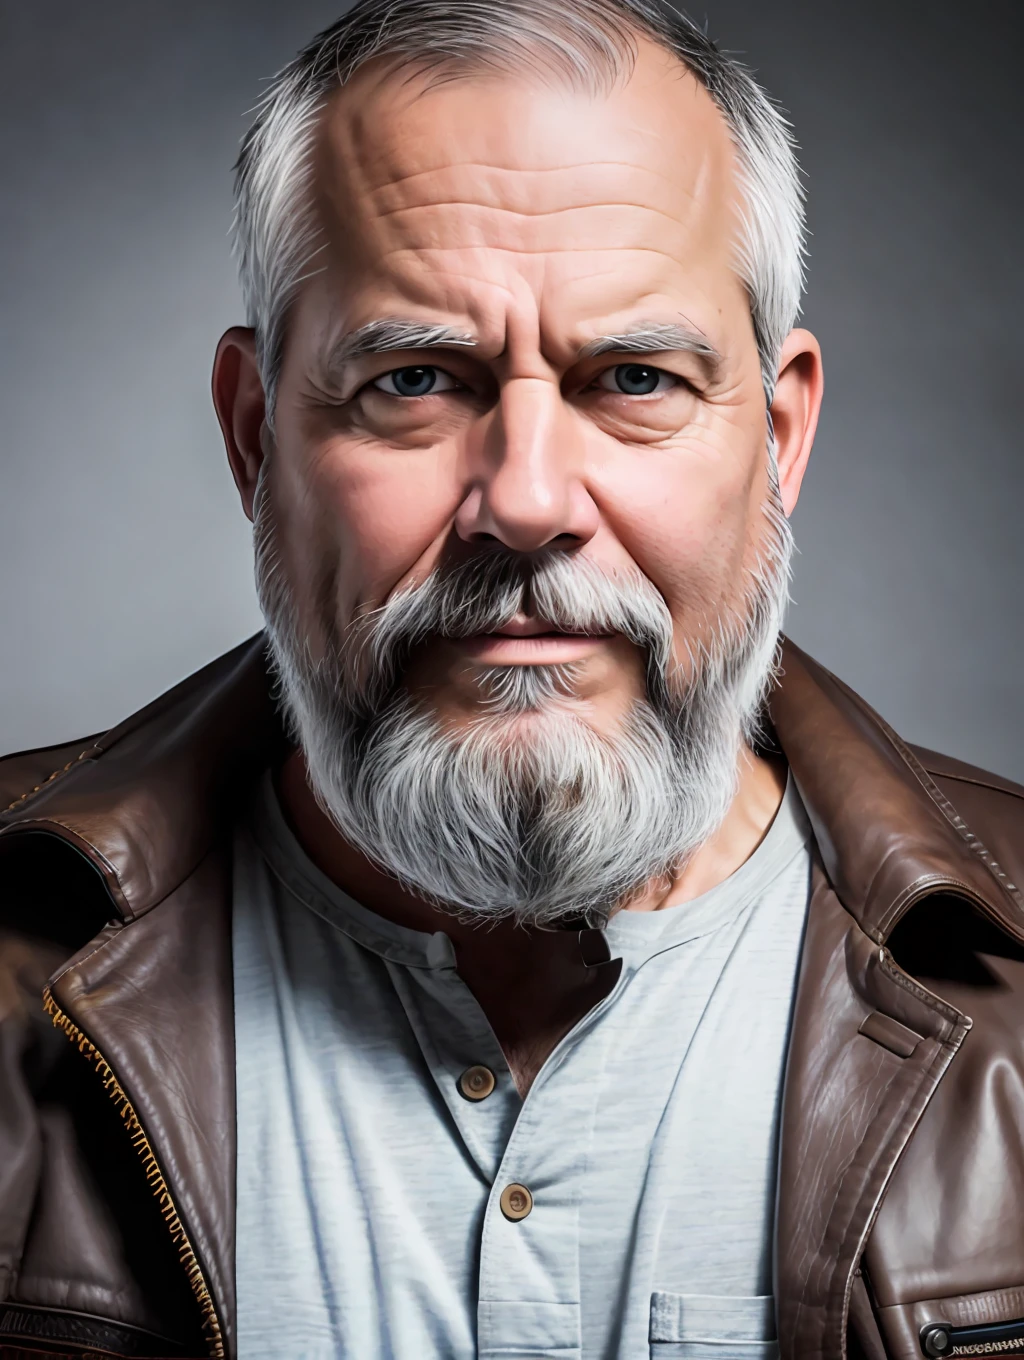 Portrait of a middle-aged man, detailed skin face, expression wrinkles, lumberjack style gray beard, raw beige leather jacket, white T-shirt without print, stiff countenance. Ultra detailed scene, dslr camera with 50mm Lens, soft studio lighting